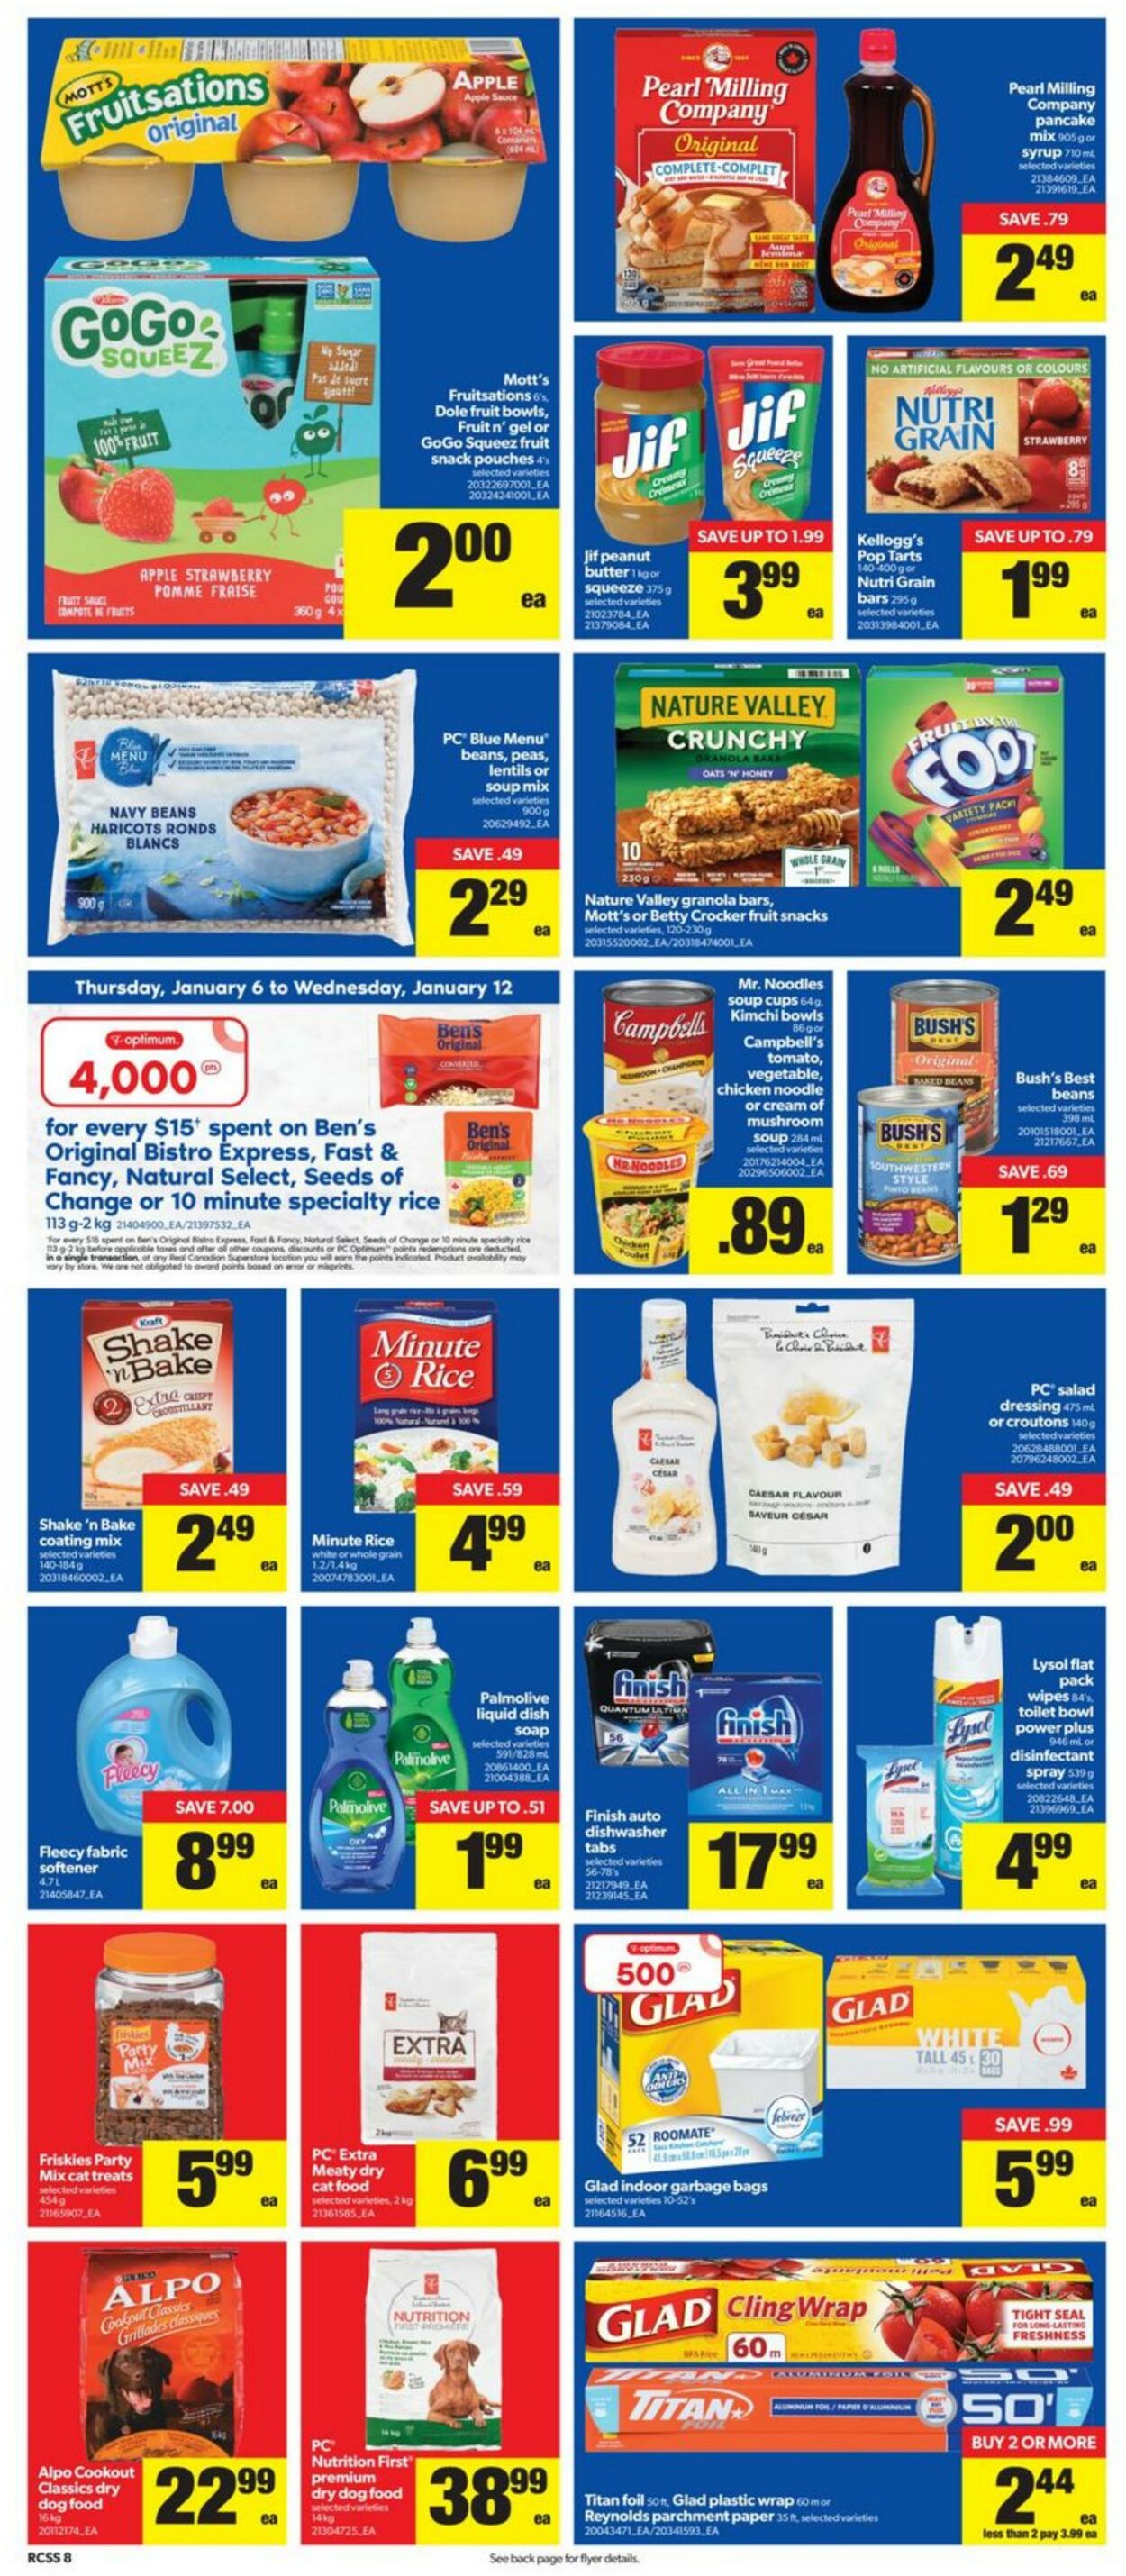 Flyer Real Canadian Superstore 06.01.2022 - 12.01.2022